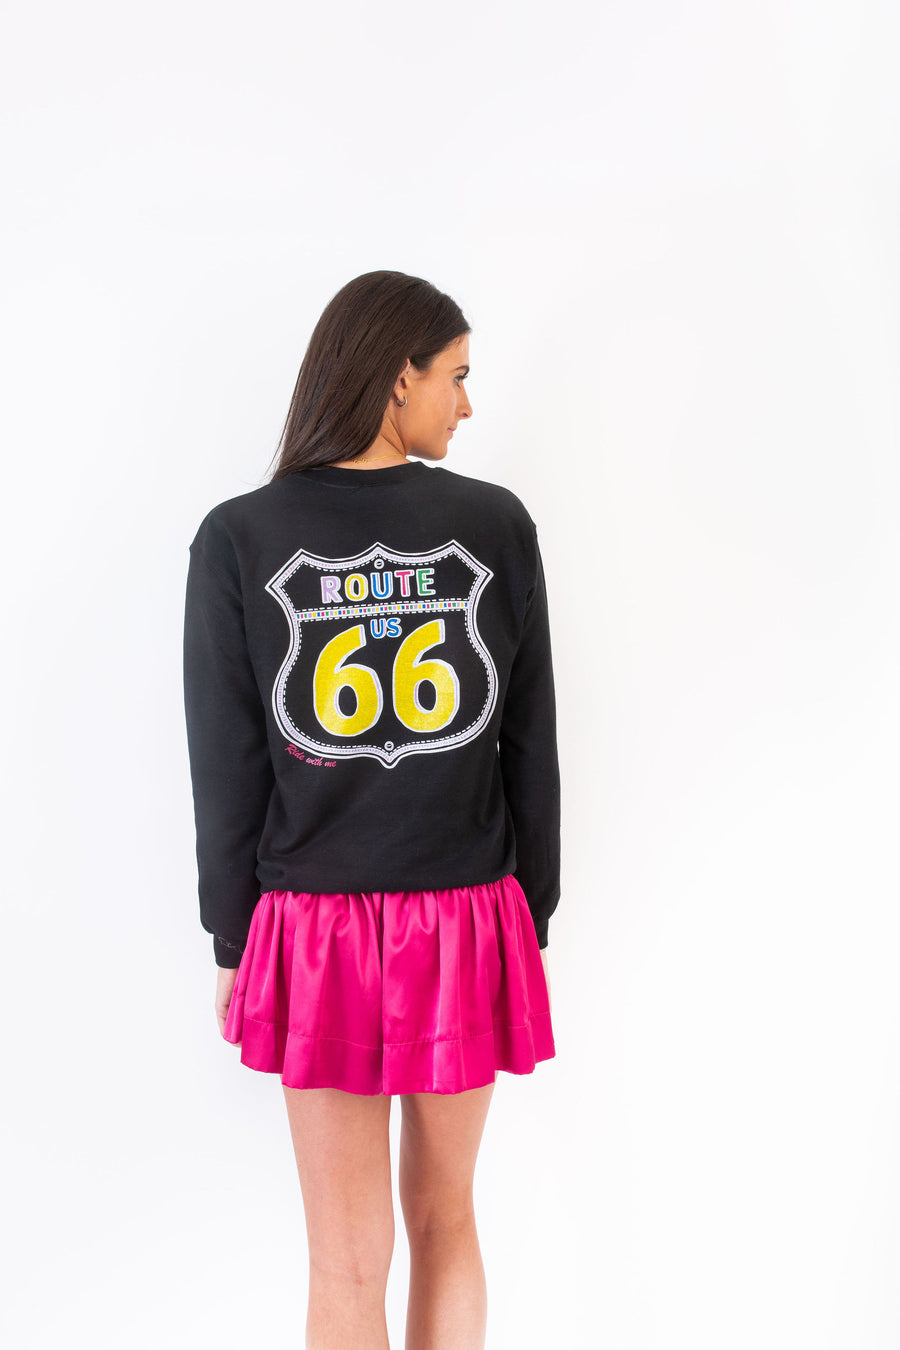 CHASE SWEATSHIRT ROUTE 66 *LIMITED*EDITION*